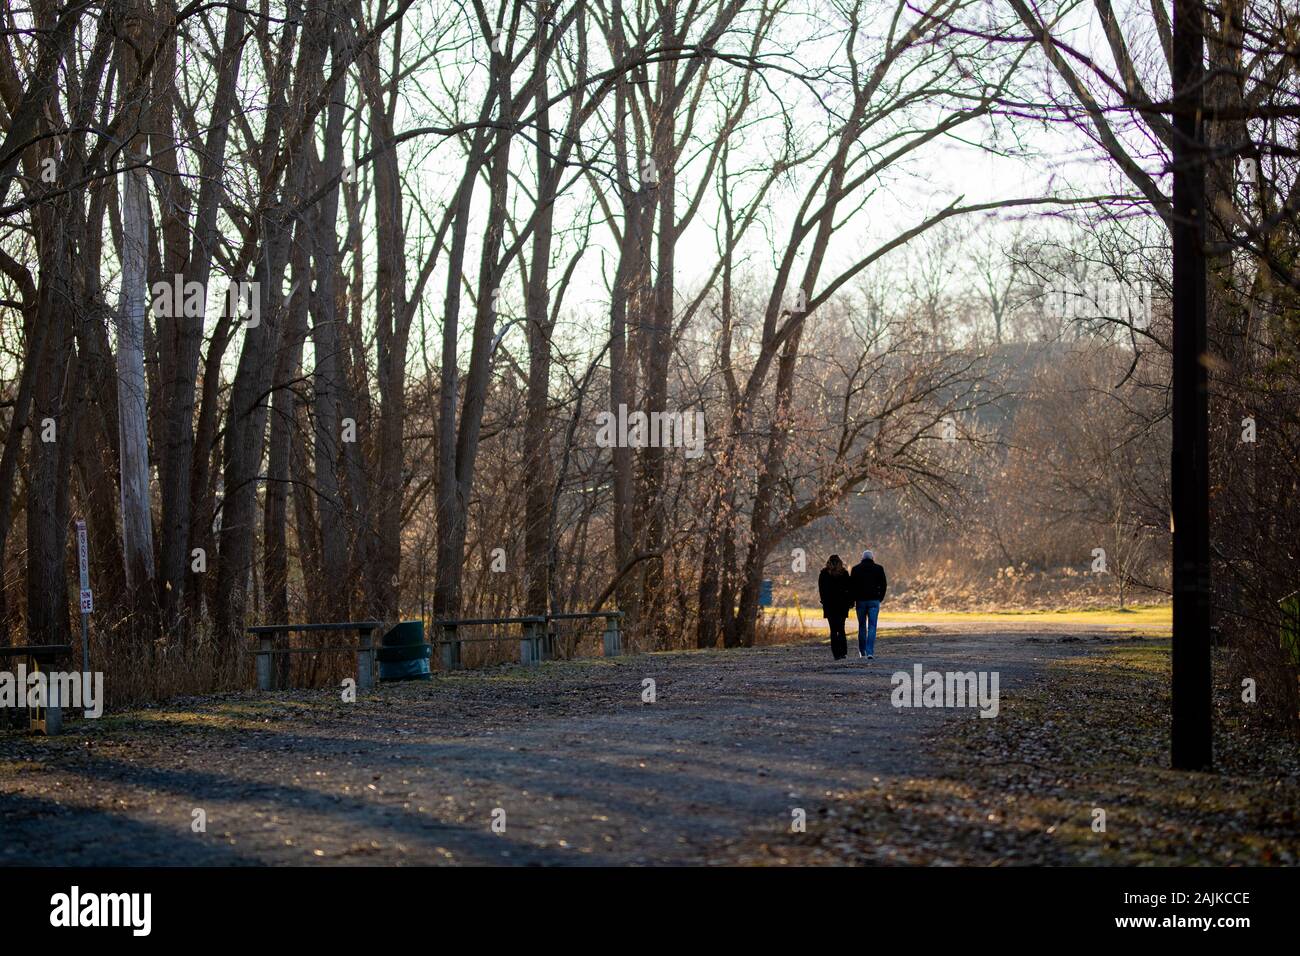 Unidentified Couple Walking Path in Forest Away From the Viewer Stock Photo